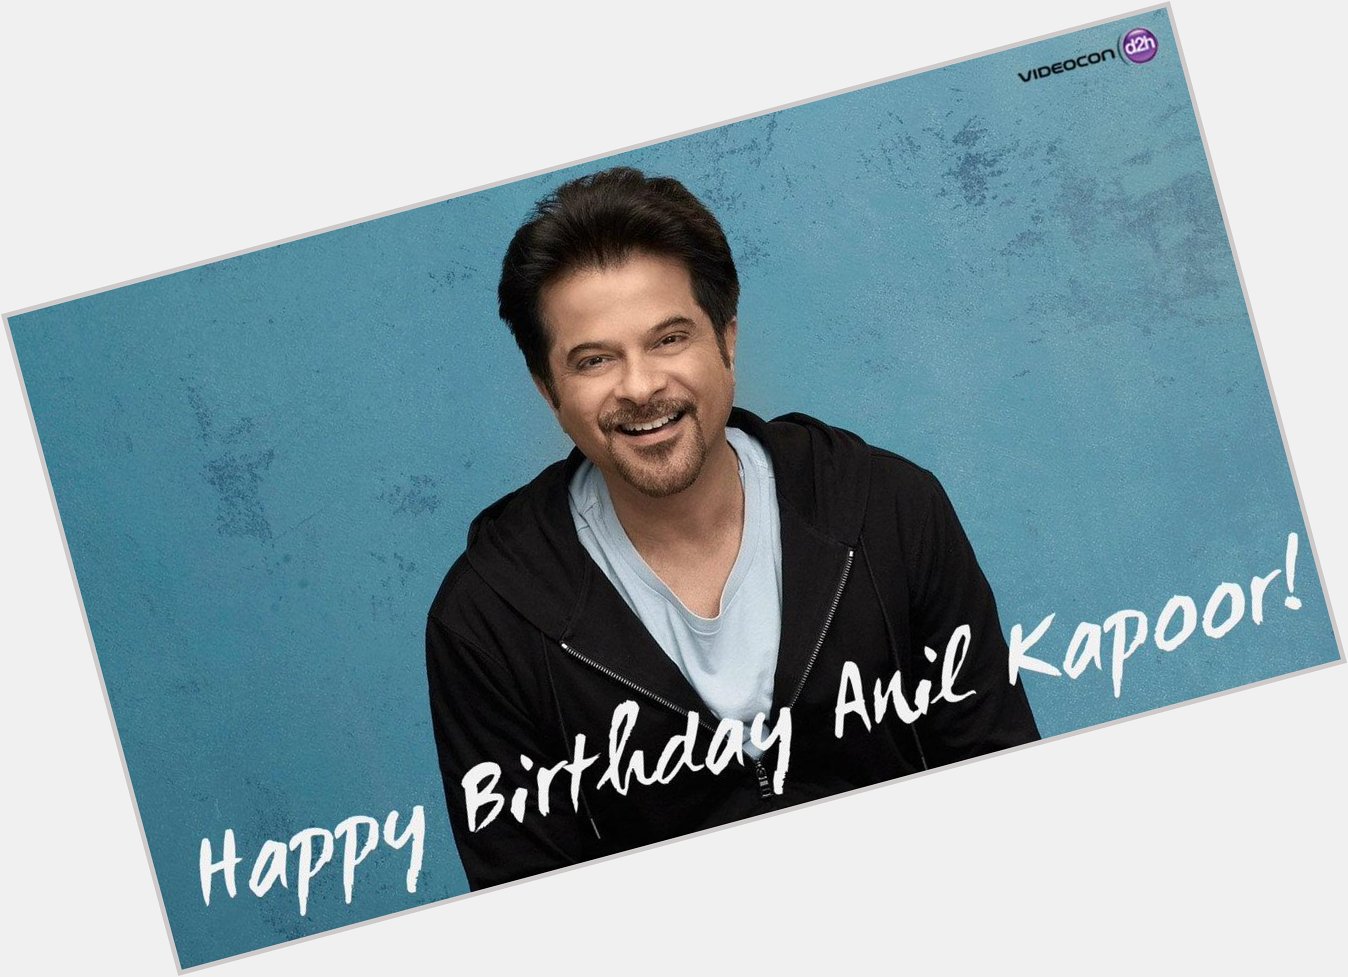 Happy Birthday Anil Kapoor!
Join us in wishing the talented actor a joyous year ahead. 